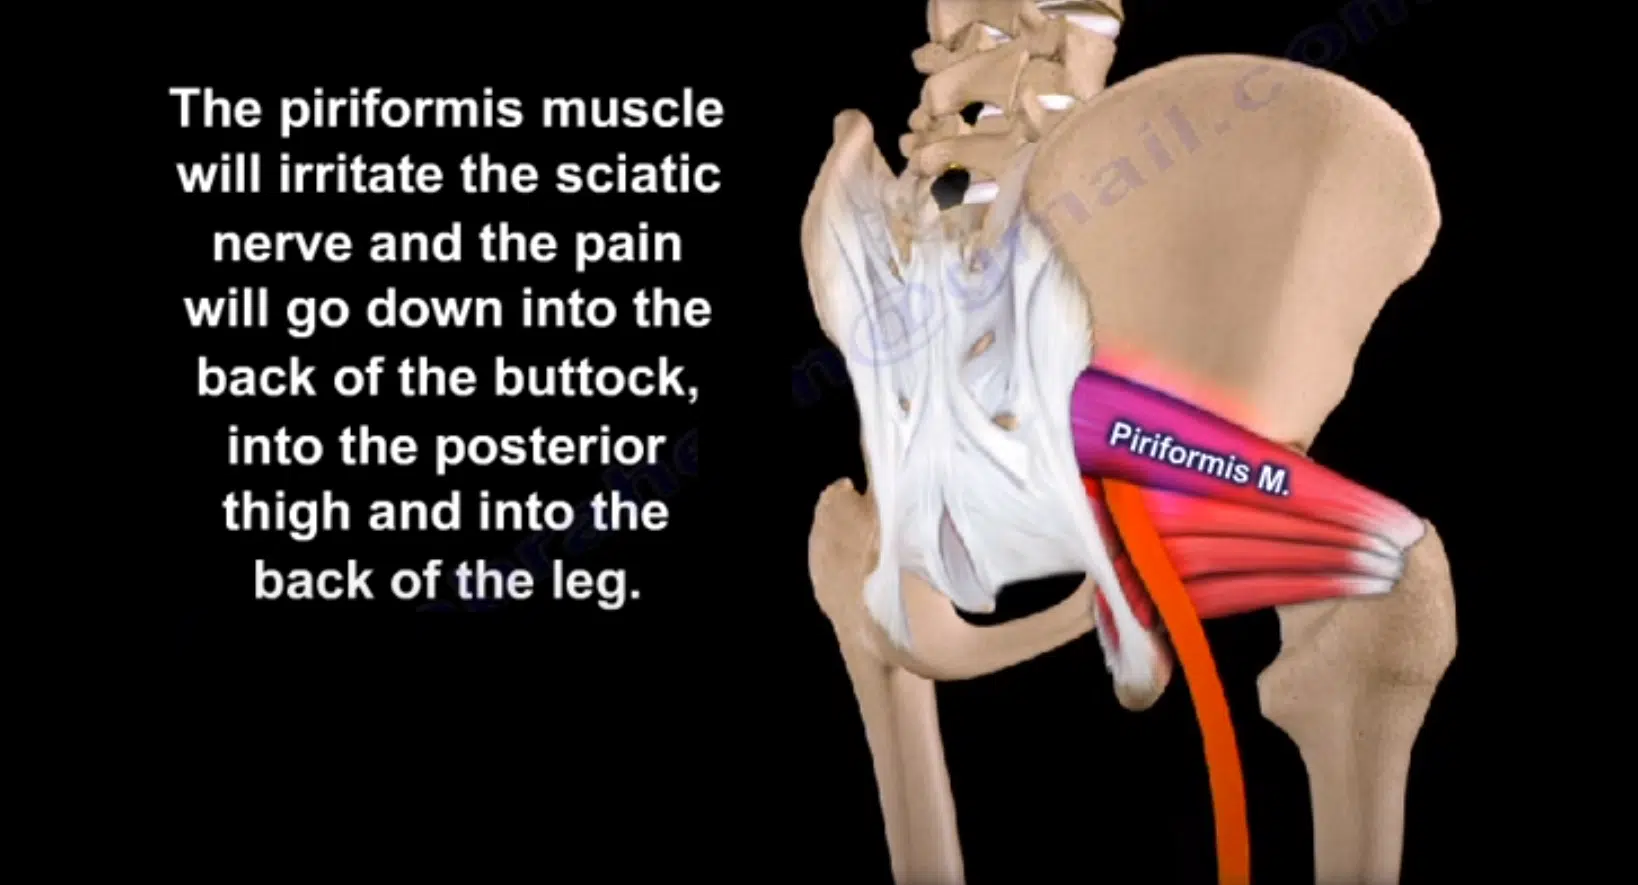 Piriformis syndrome can cause buttock pain and sciatica